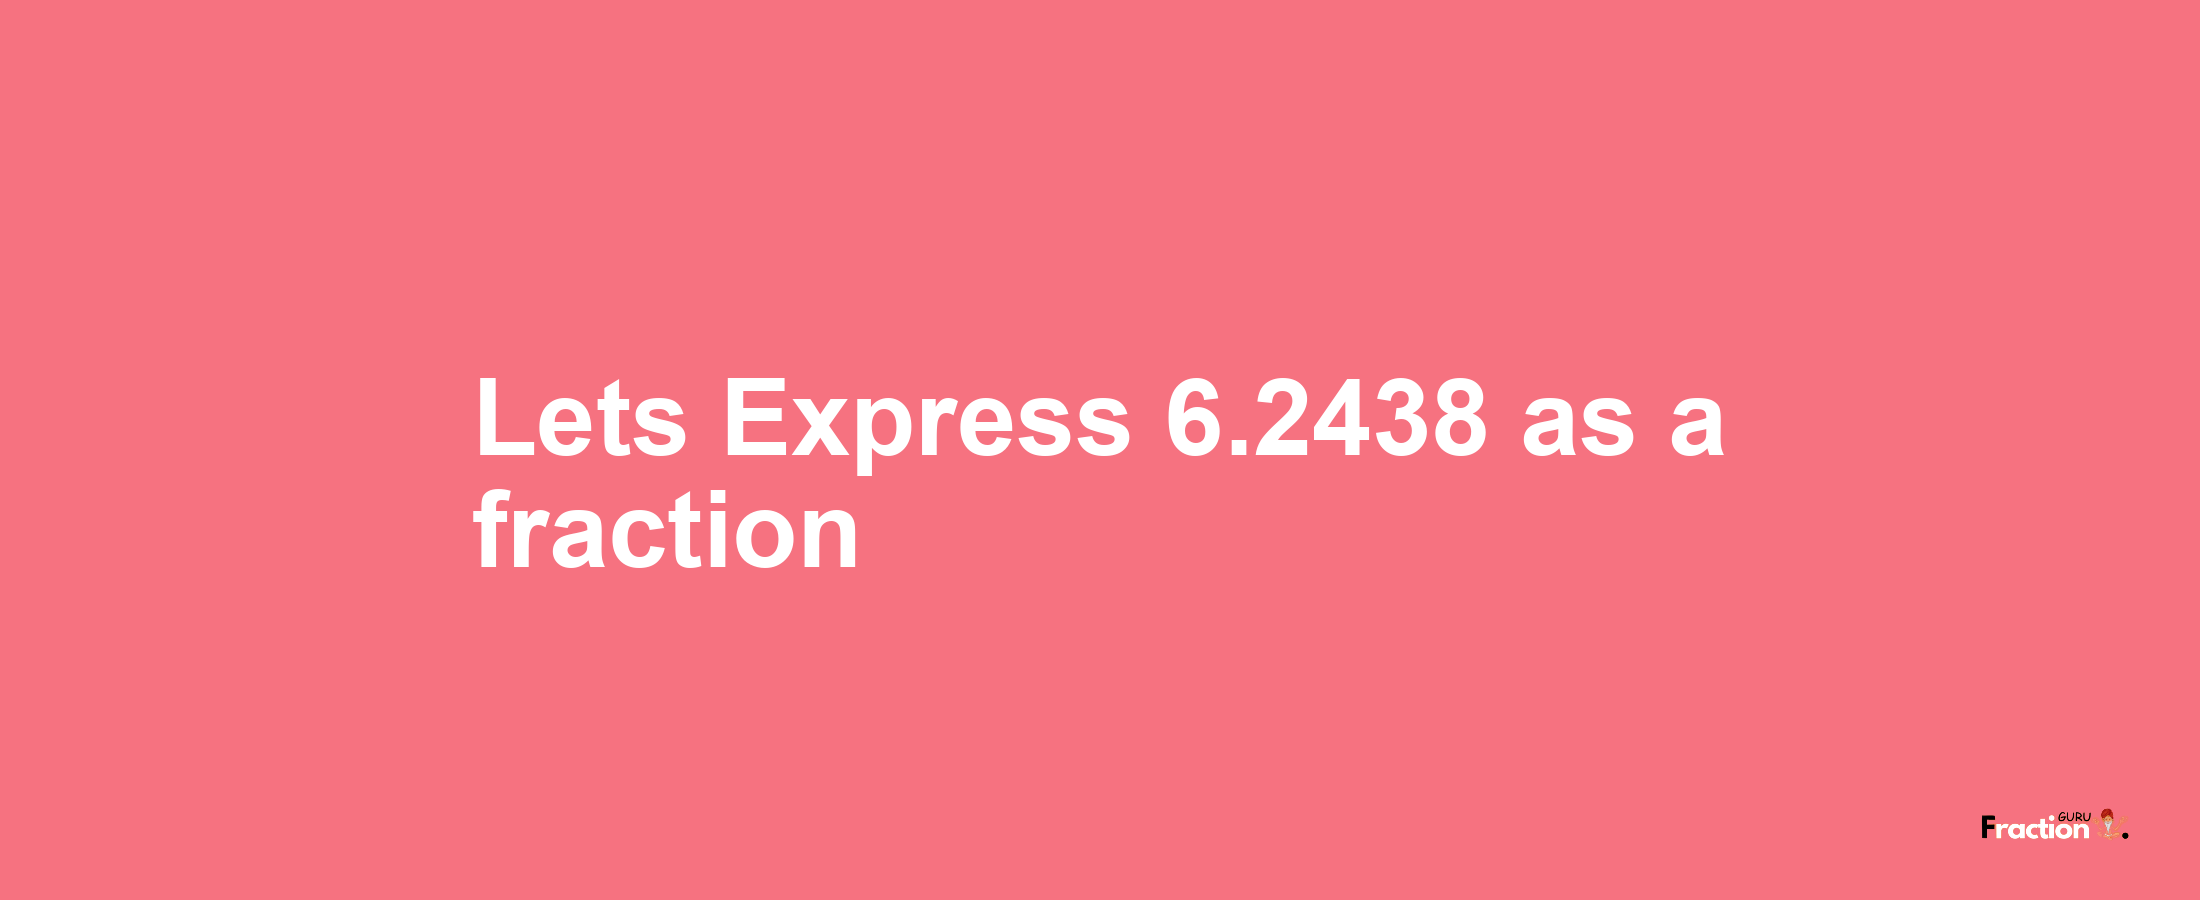 Lets Express 6.2438 as afraction